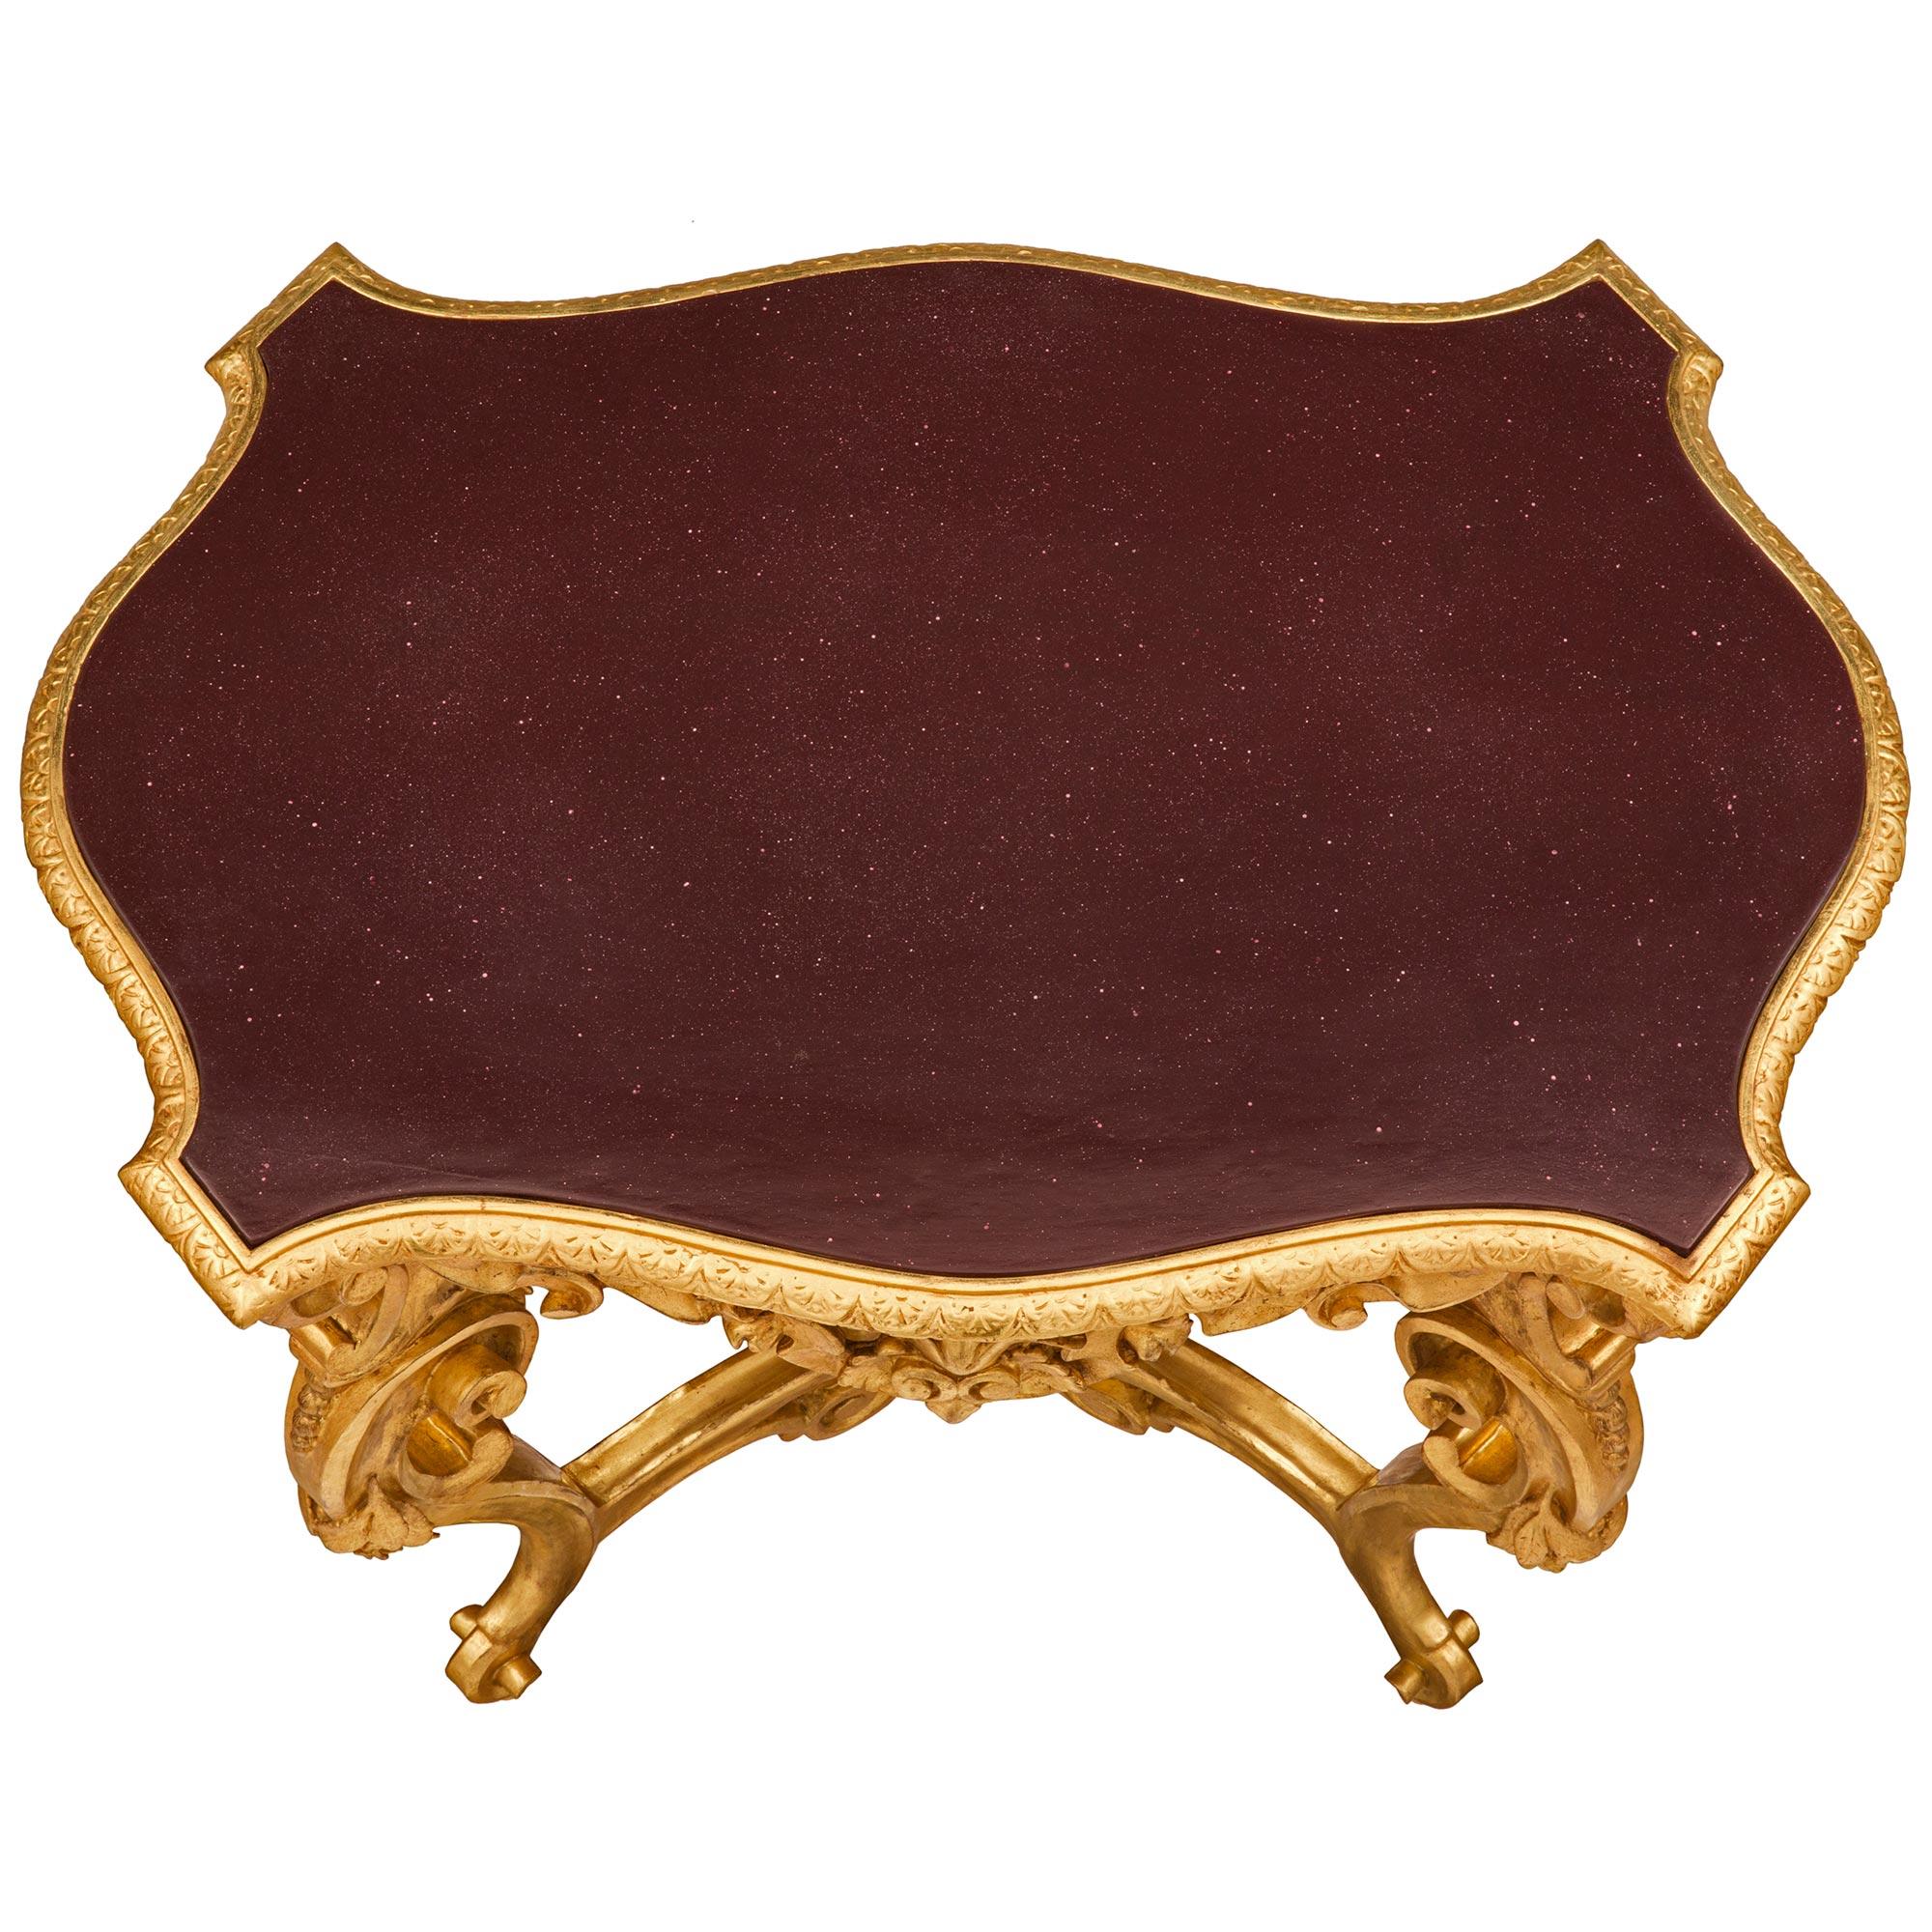 A stunning Italian 19th century Baroque st. giltwood and faux painted Porphyry center table. The oblong shaped table is raised by impressive and most decorative scrolled foliate legs adorned with charming finely detailed floral carvings. Each of the